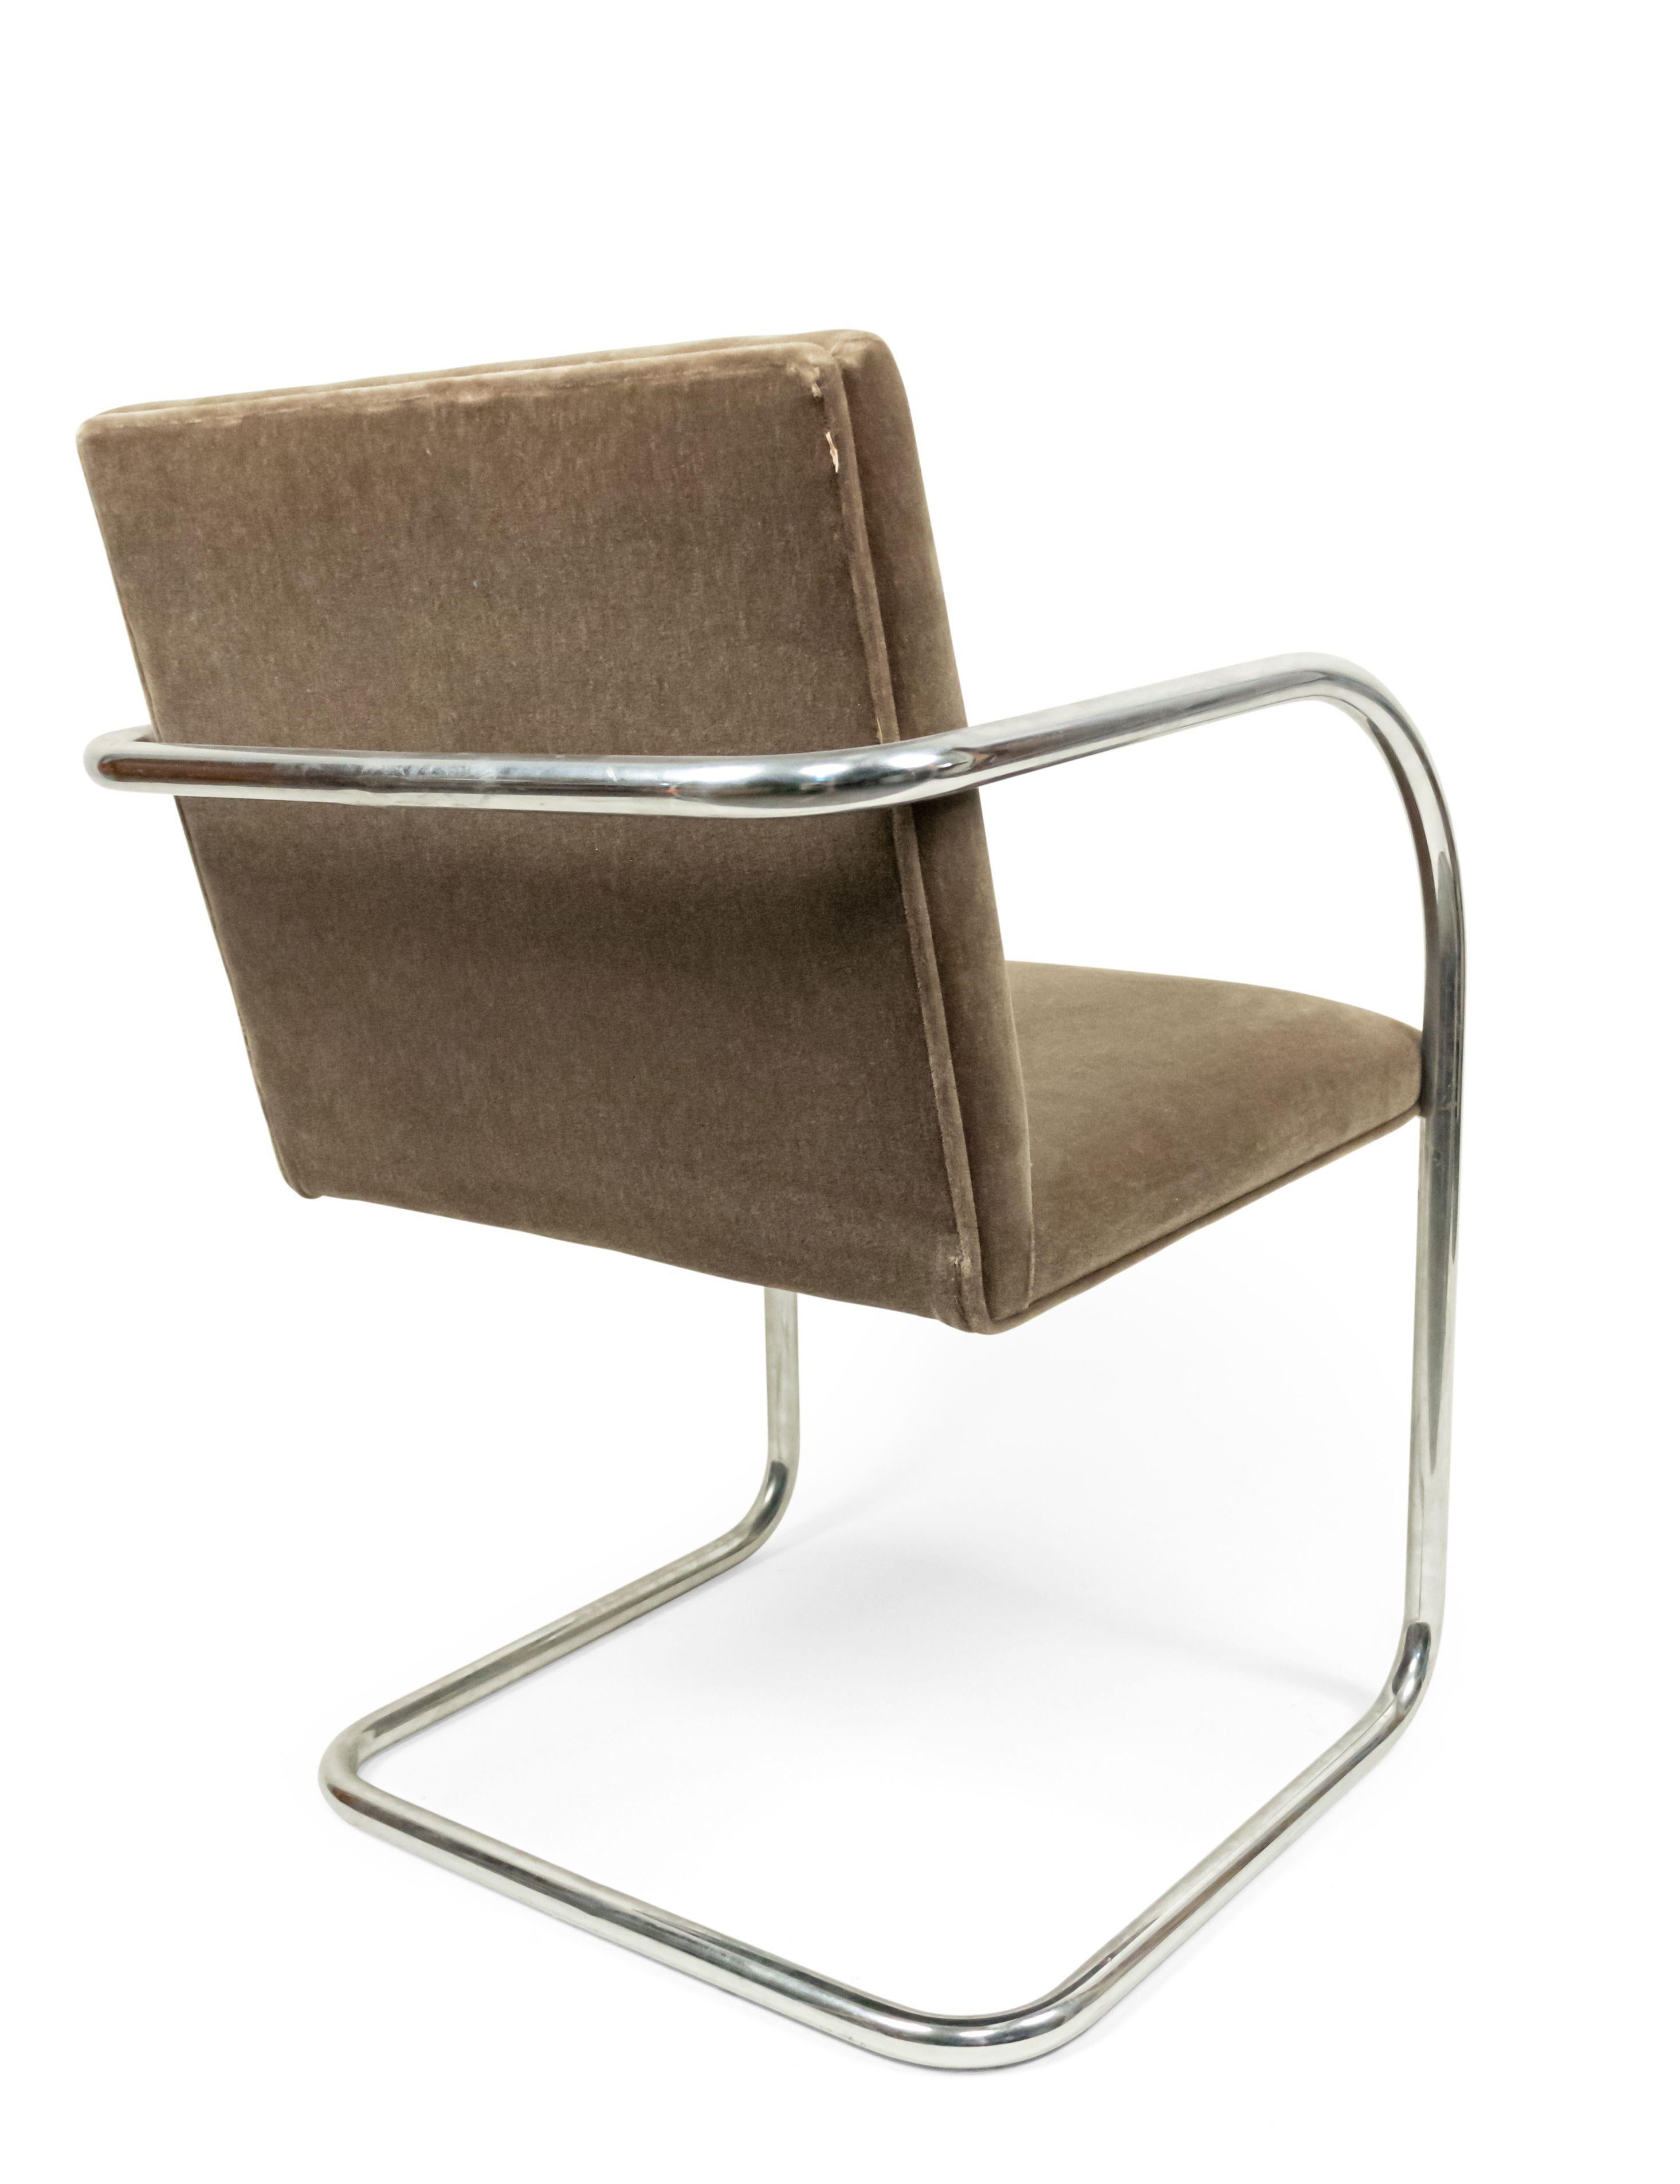 Steel American Post-War Design Leather Chairs For Sale